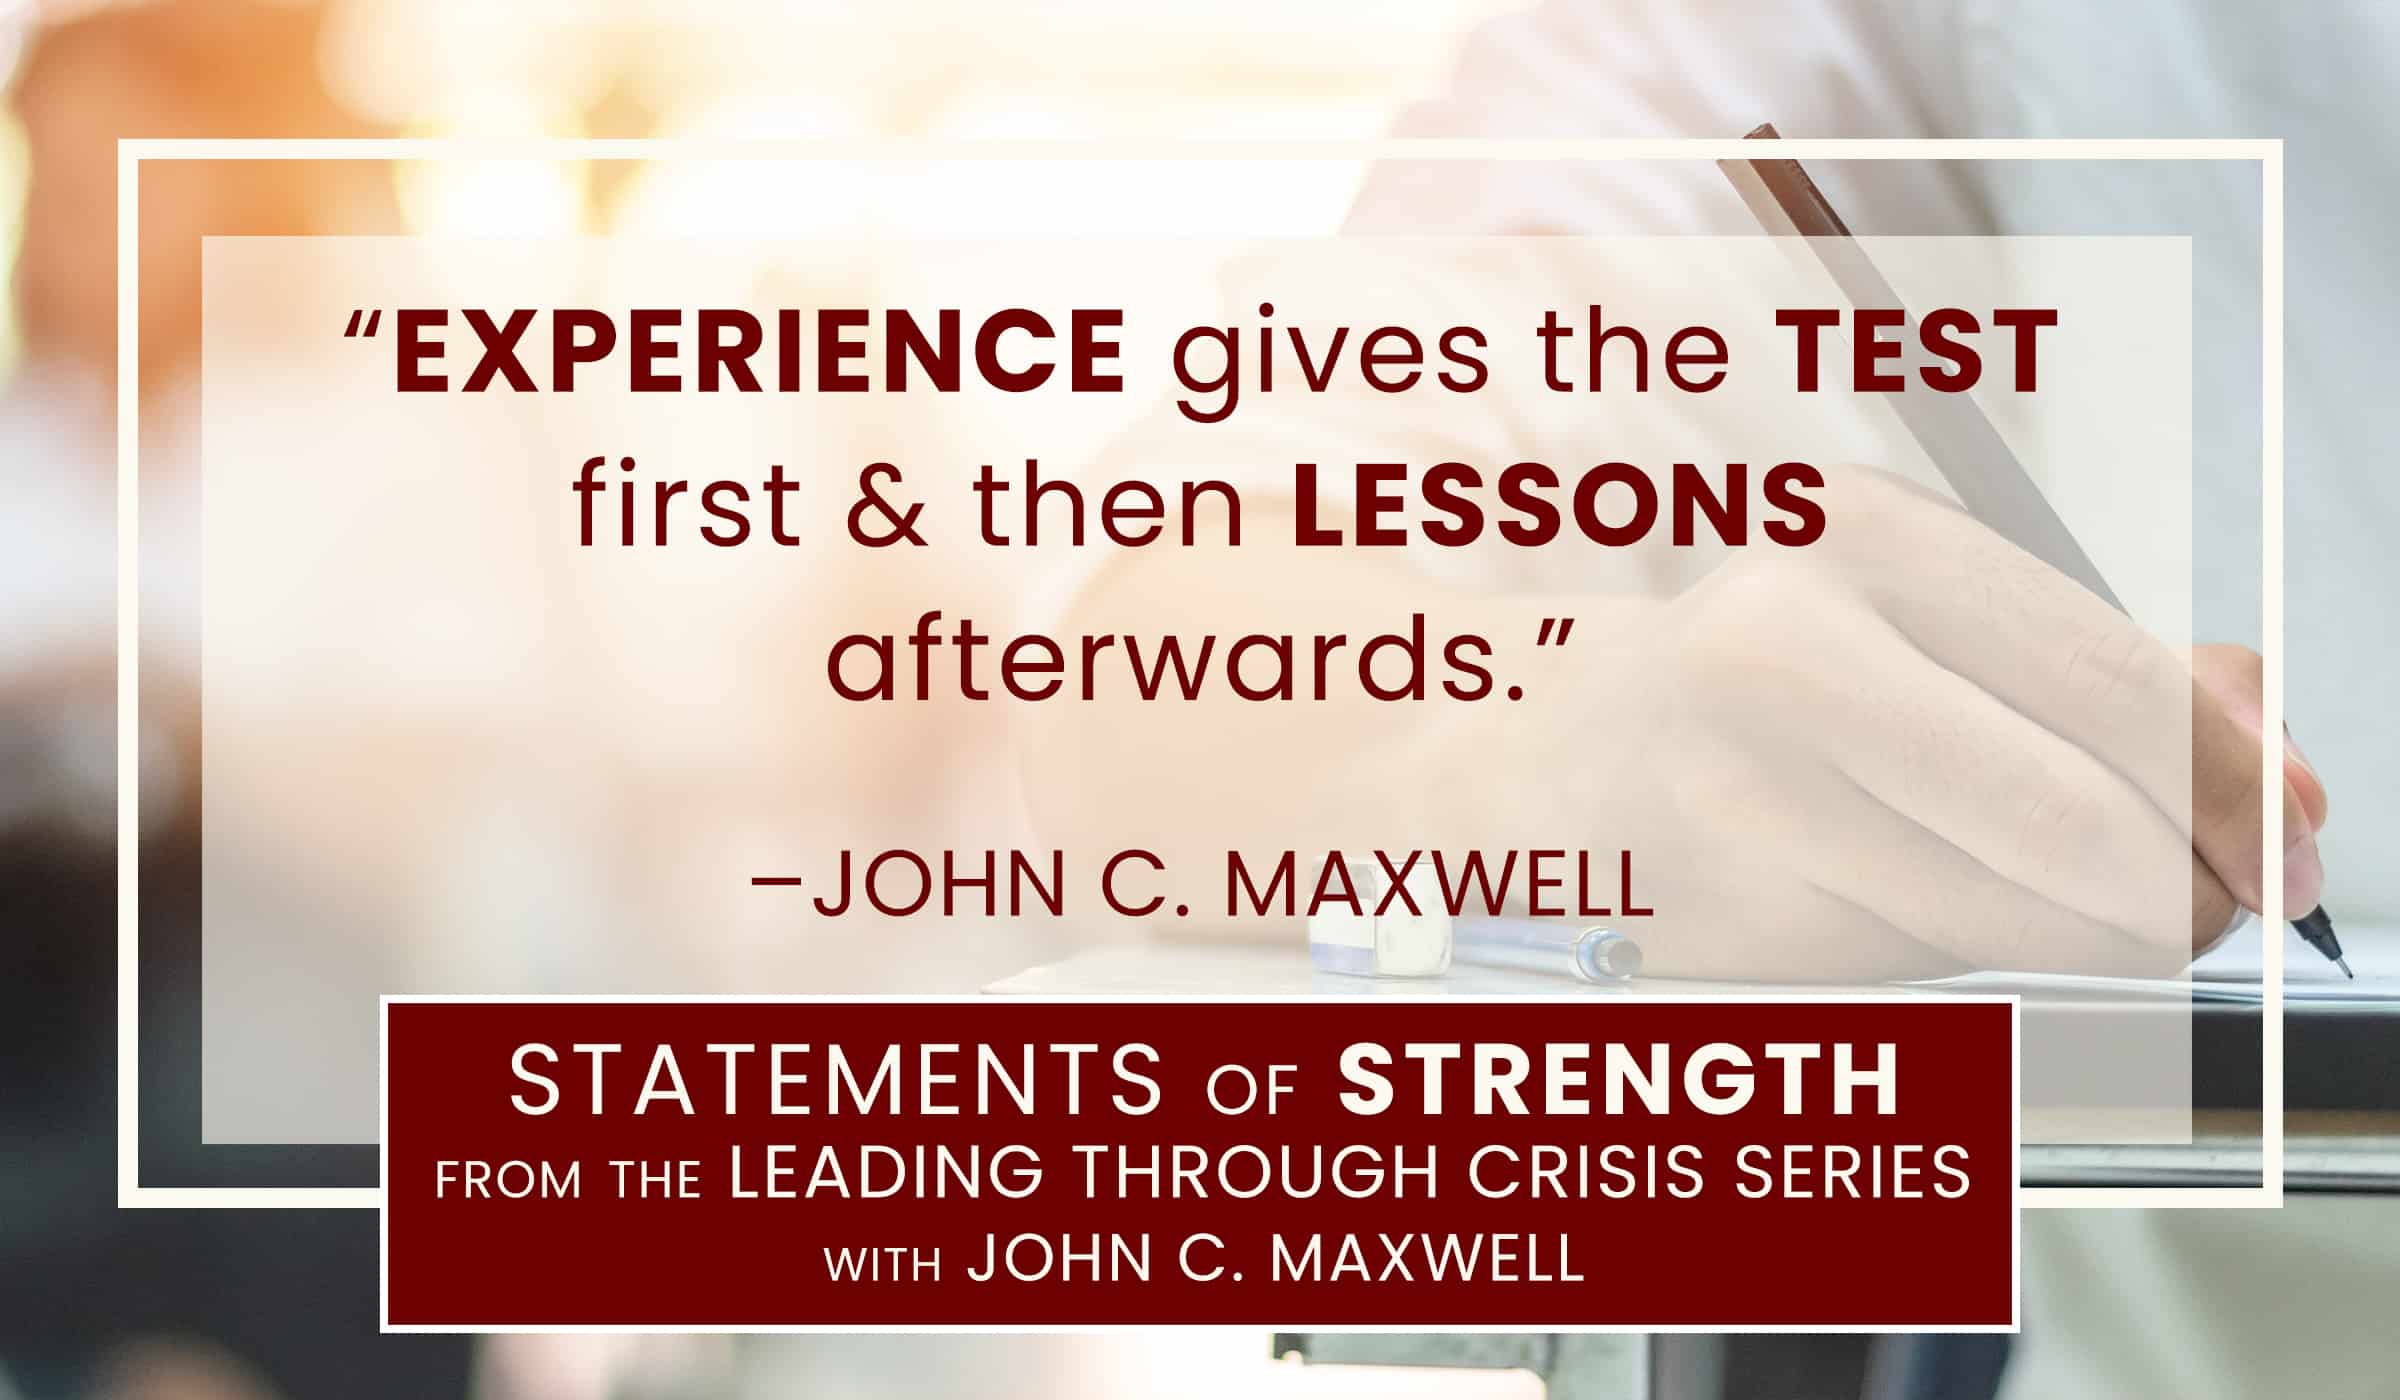 image of quote pic with quotation text by john c maxwell on life tests and lessons